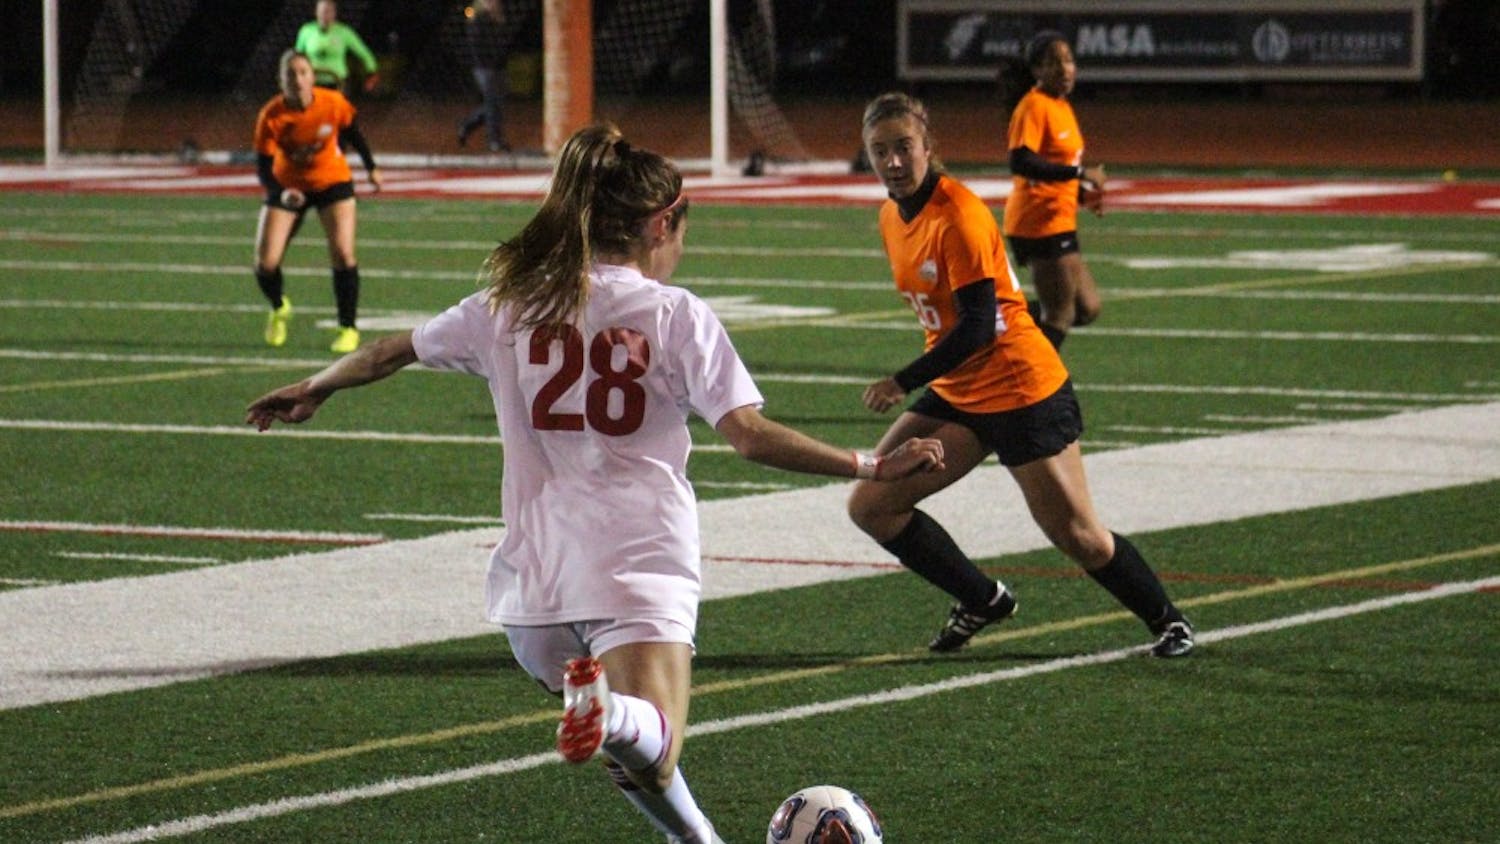 Cardinal women's soccer team wins Ohio Athletic Conference title